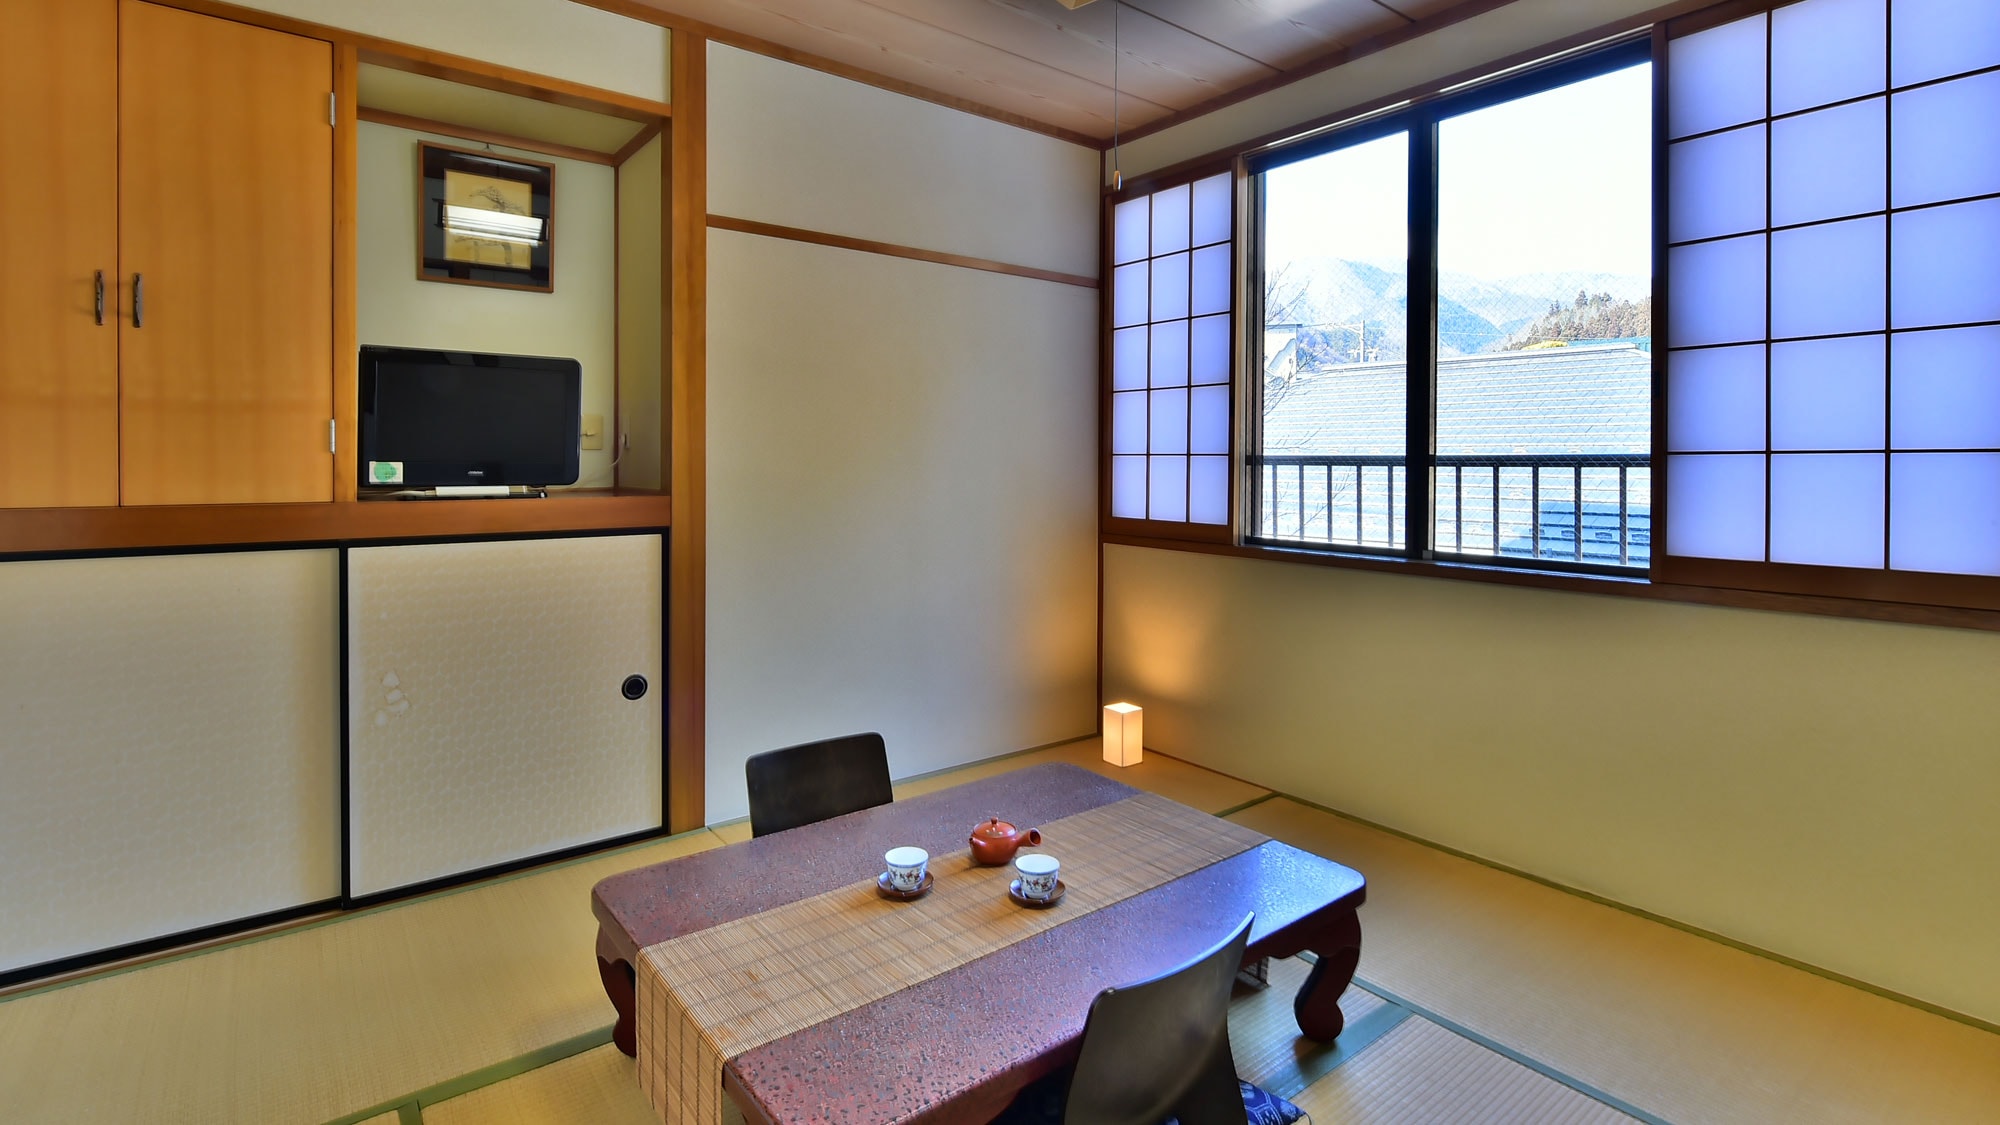 Japanese-style room with 8 tatami mats